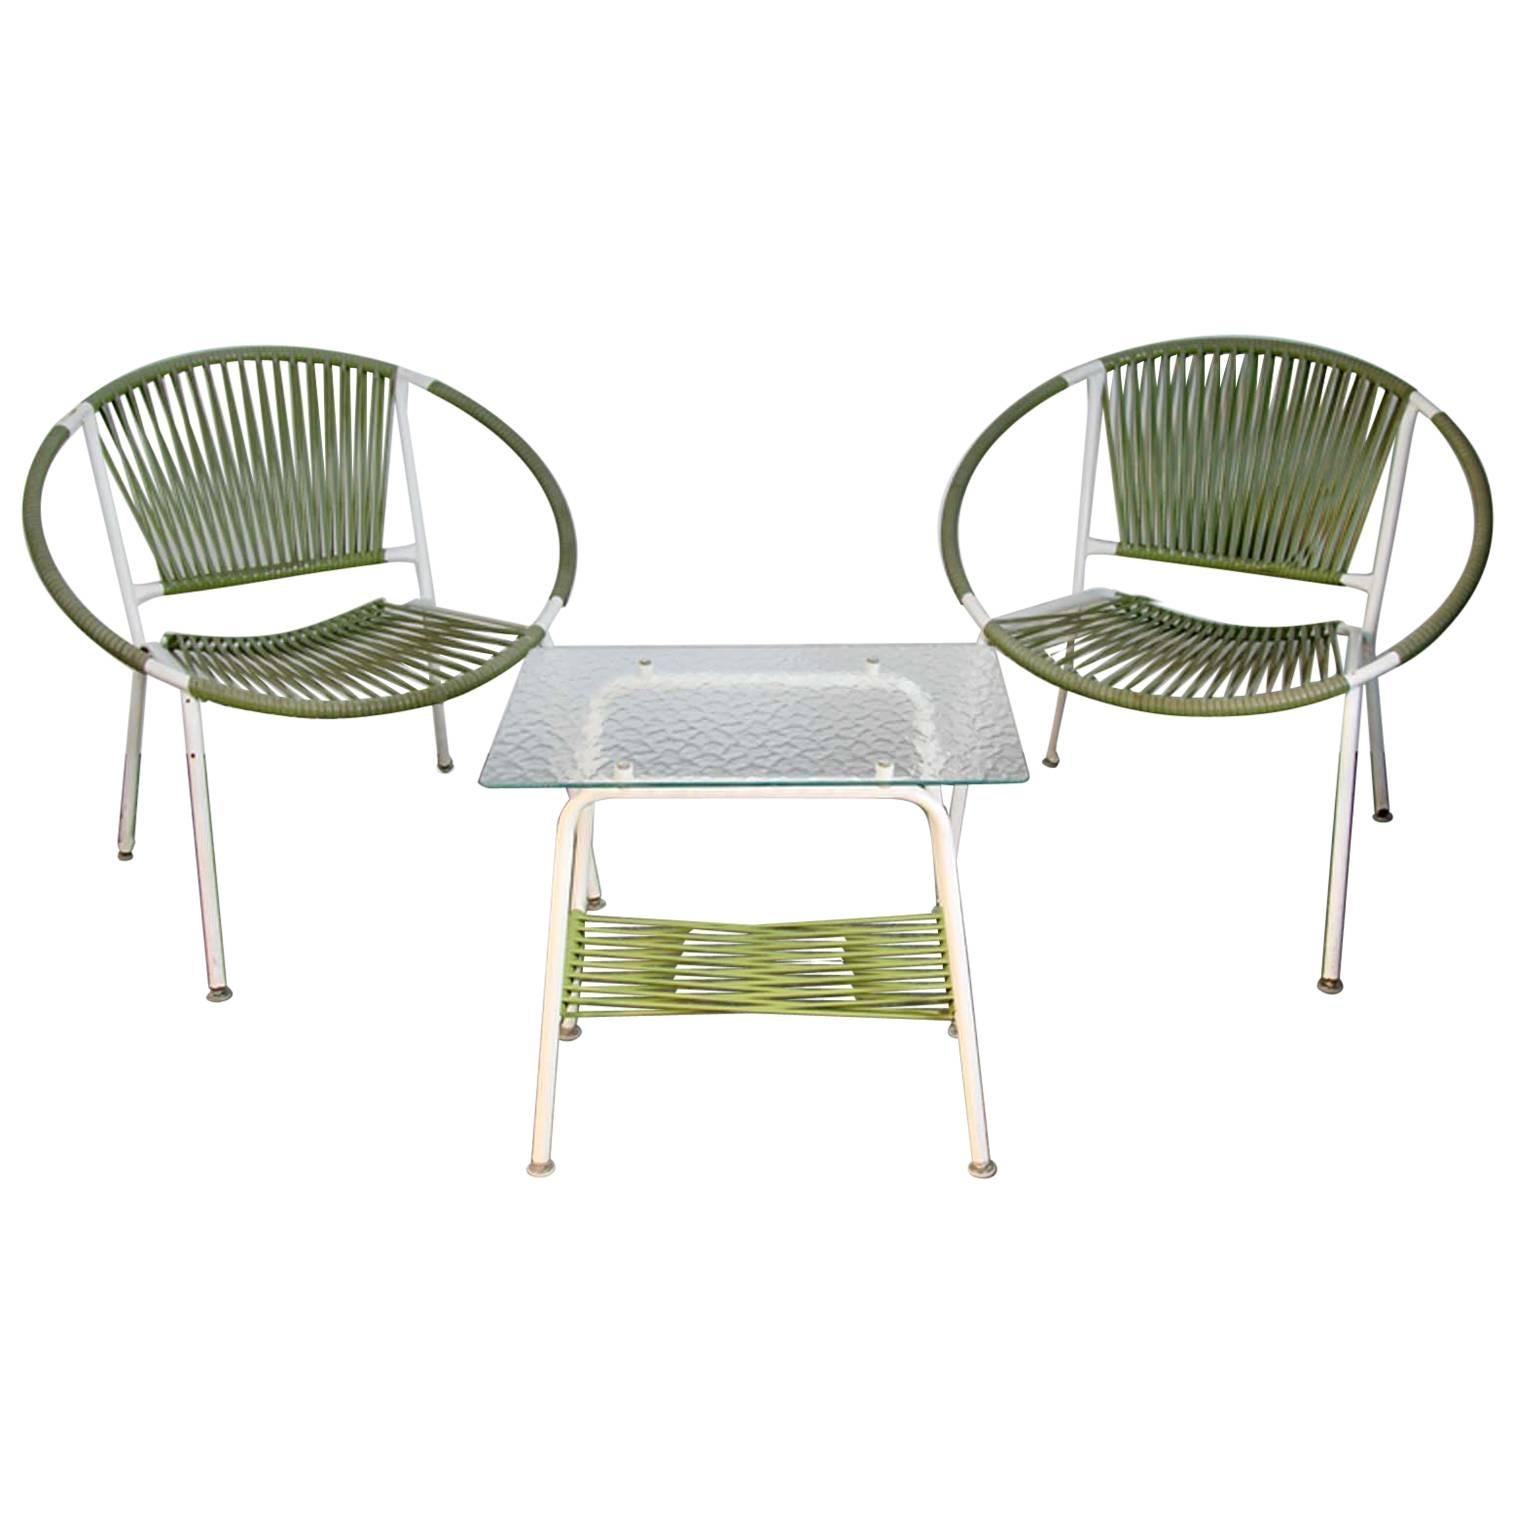 Modernist Pair of Hoop Chairs with Pebble Glass Snack Table Patio Set For Sale